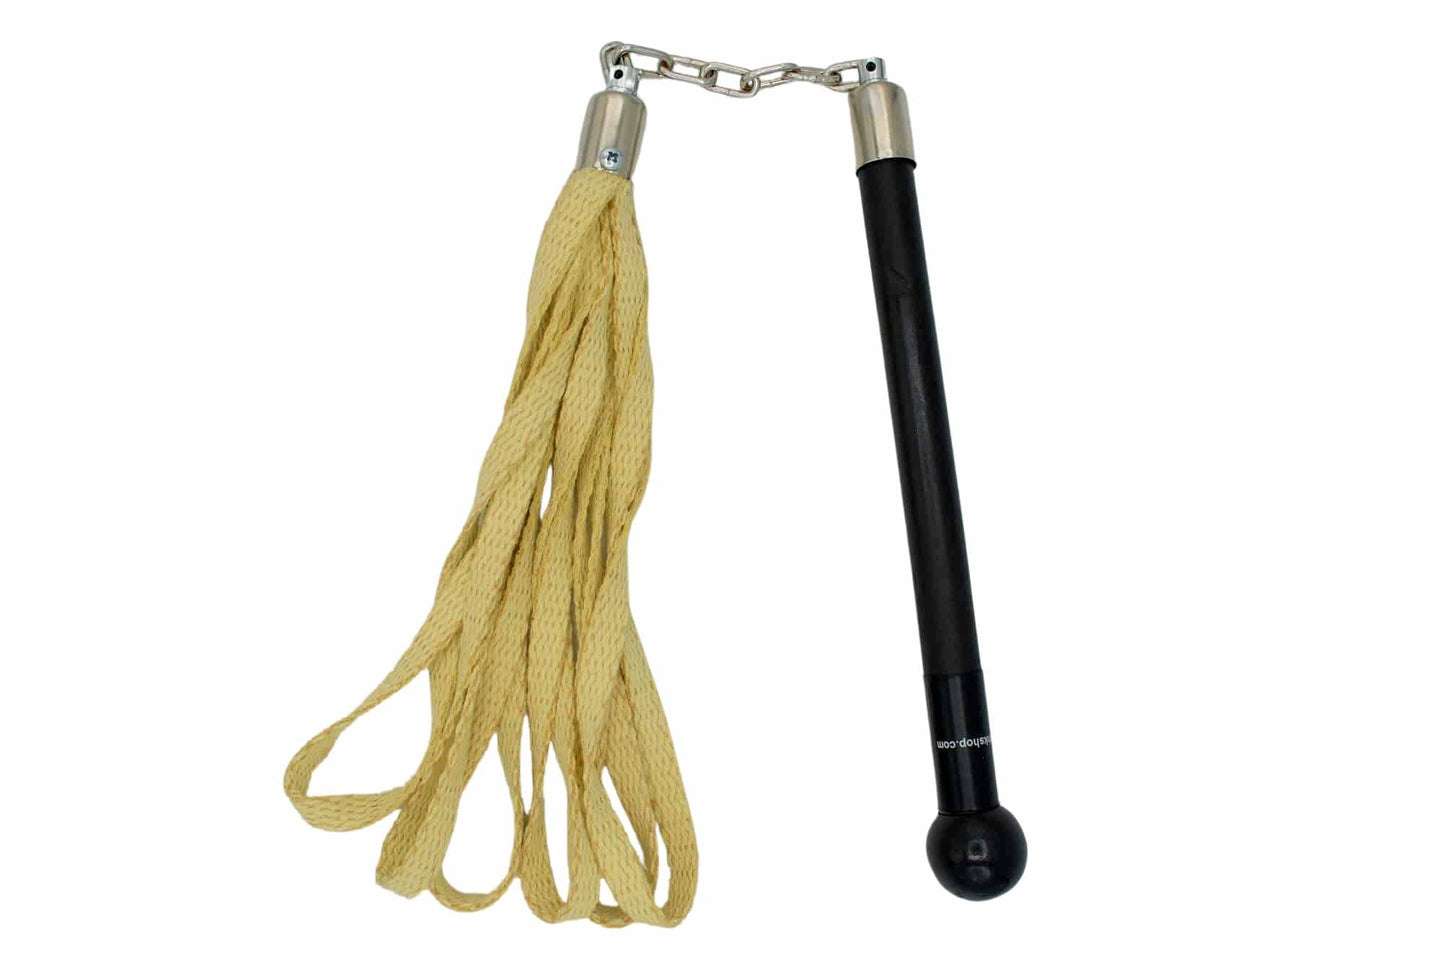 The Fire Flogger with chain and handle.